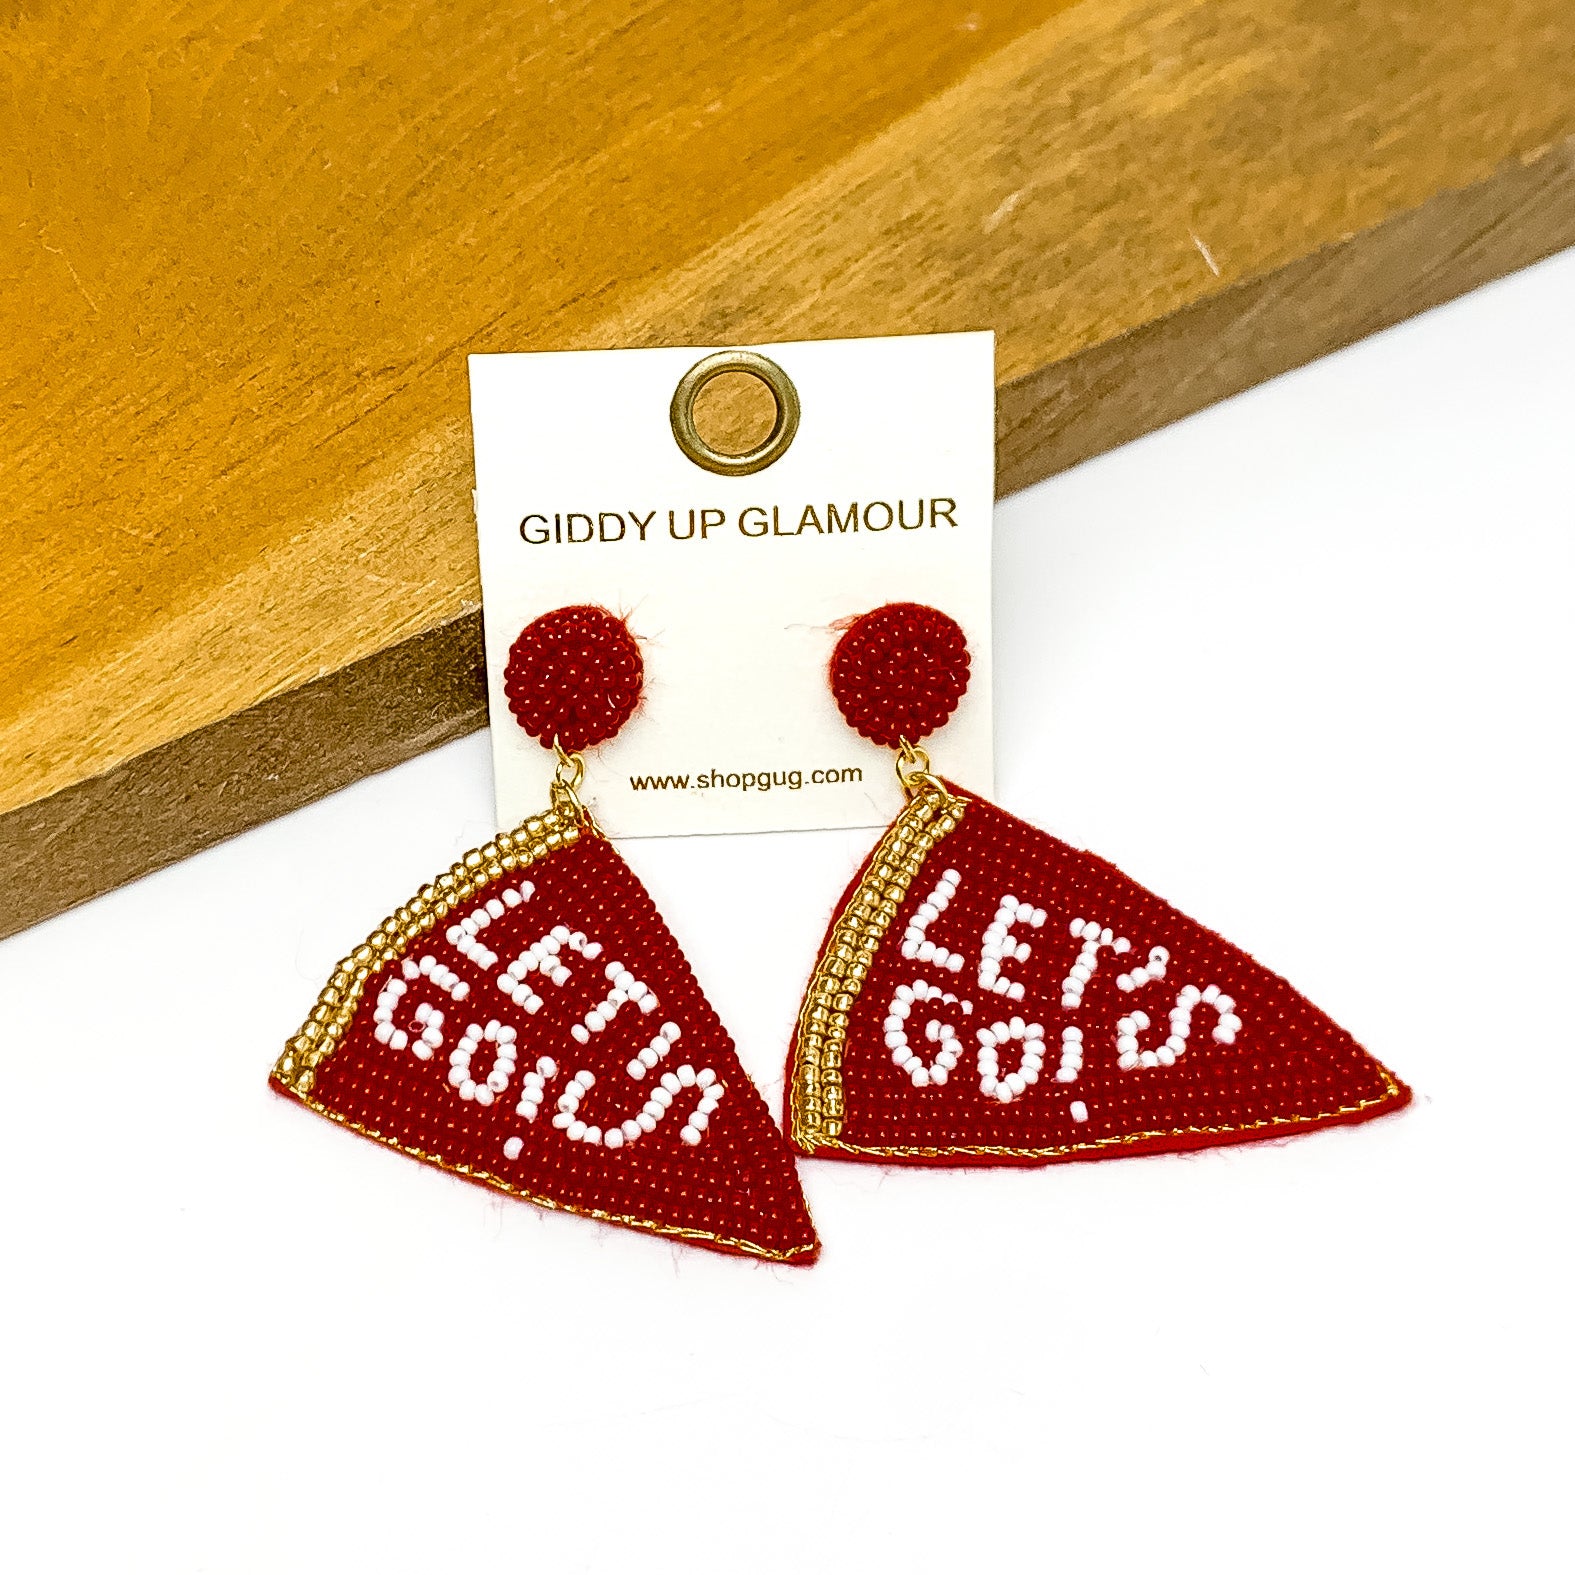 Lets Go Beaded Flag Earrings in maroon. Pictured on a white background with the earrings laying against a wood piece.